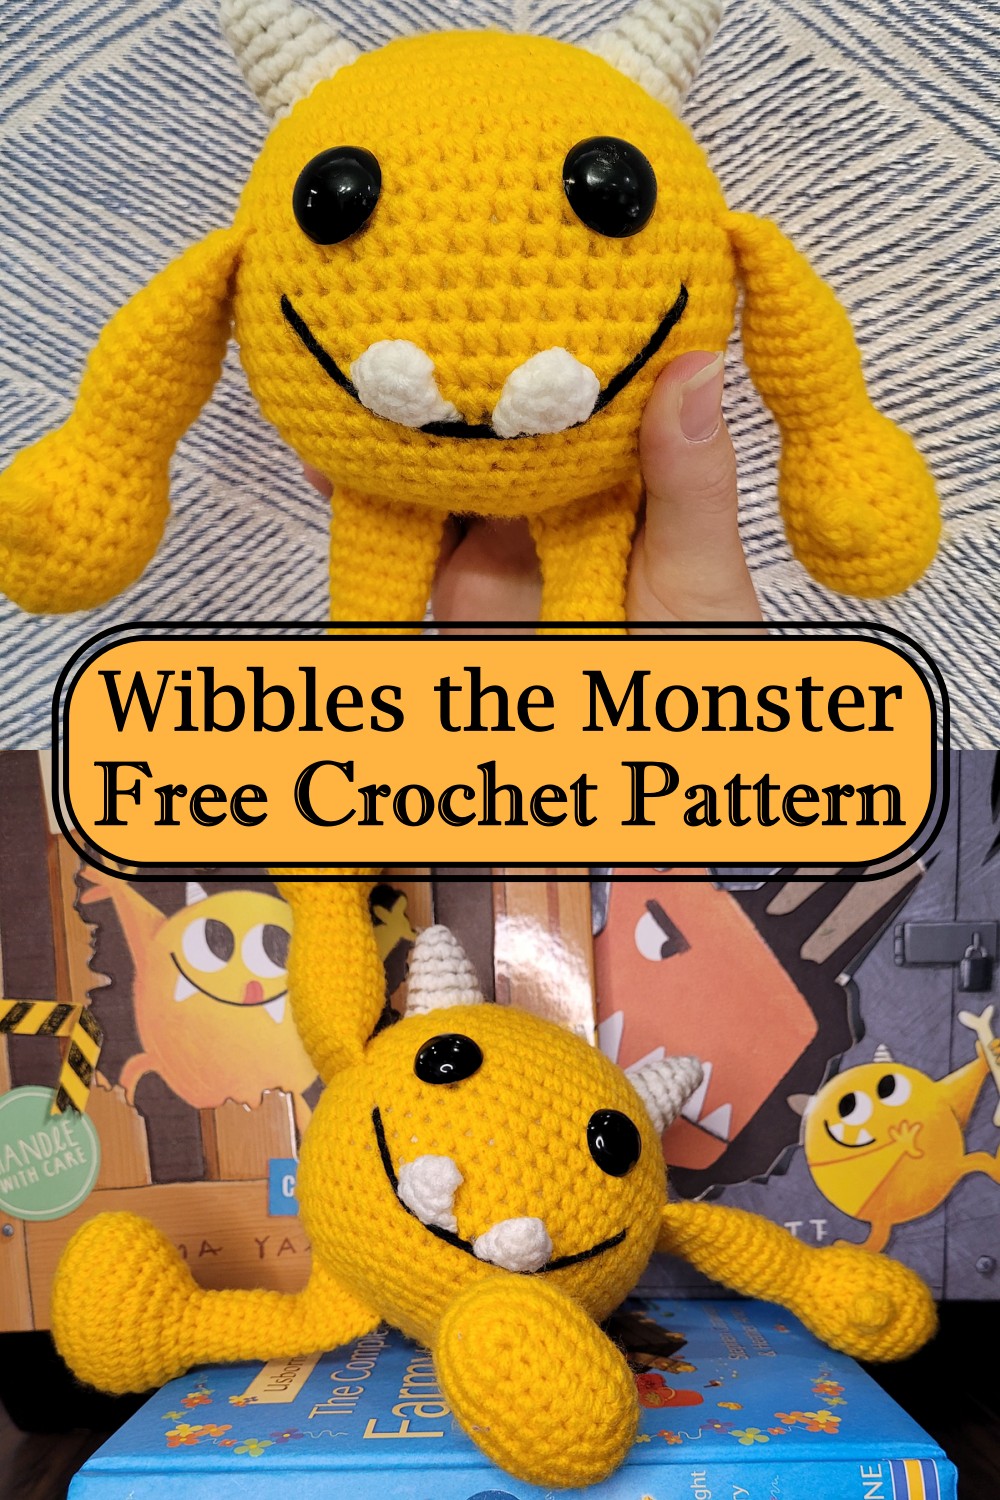 Wibbles the Monster